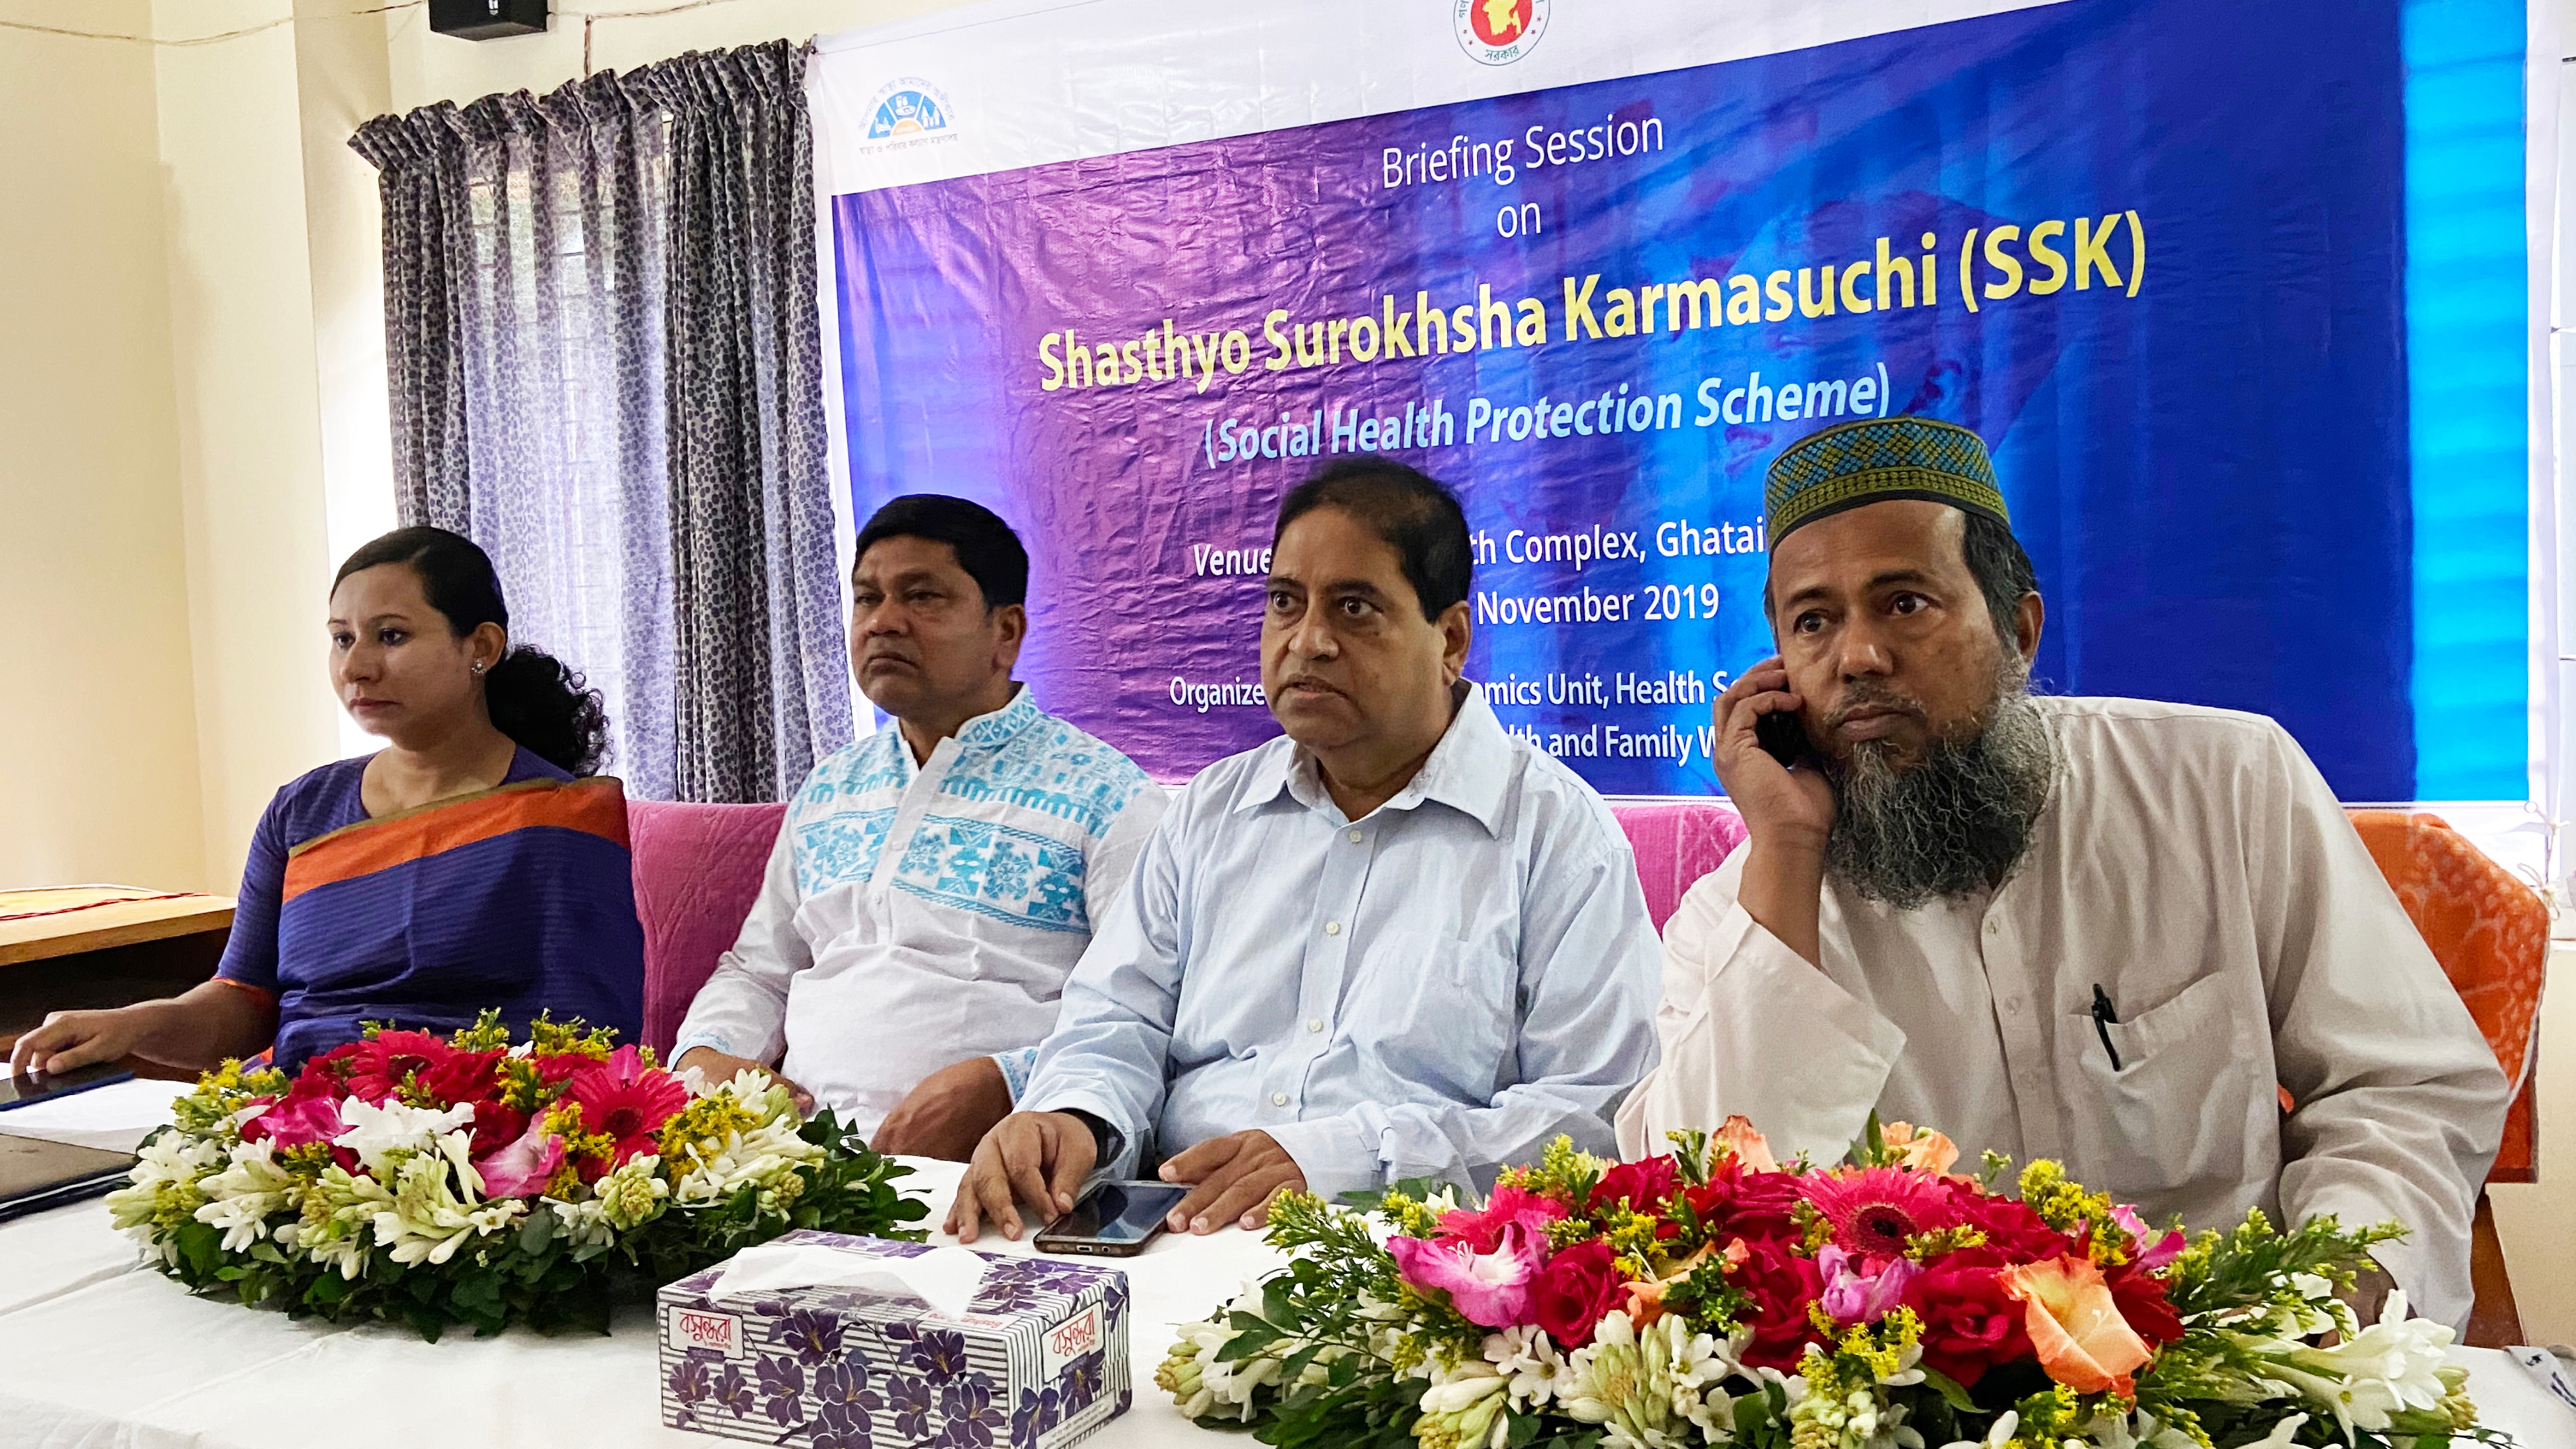 Members of the SSK-management explain the health scheme and how it can support low-income groups in Bangladesh during a workshop.